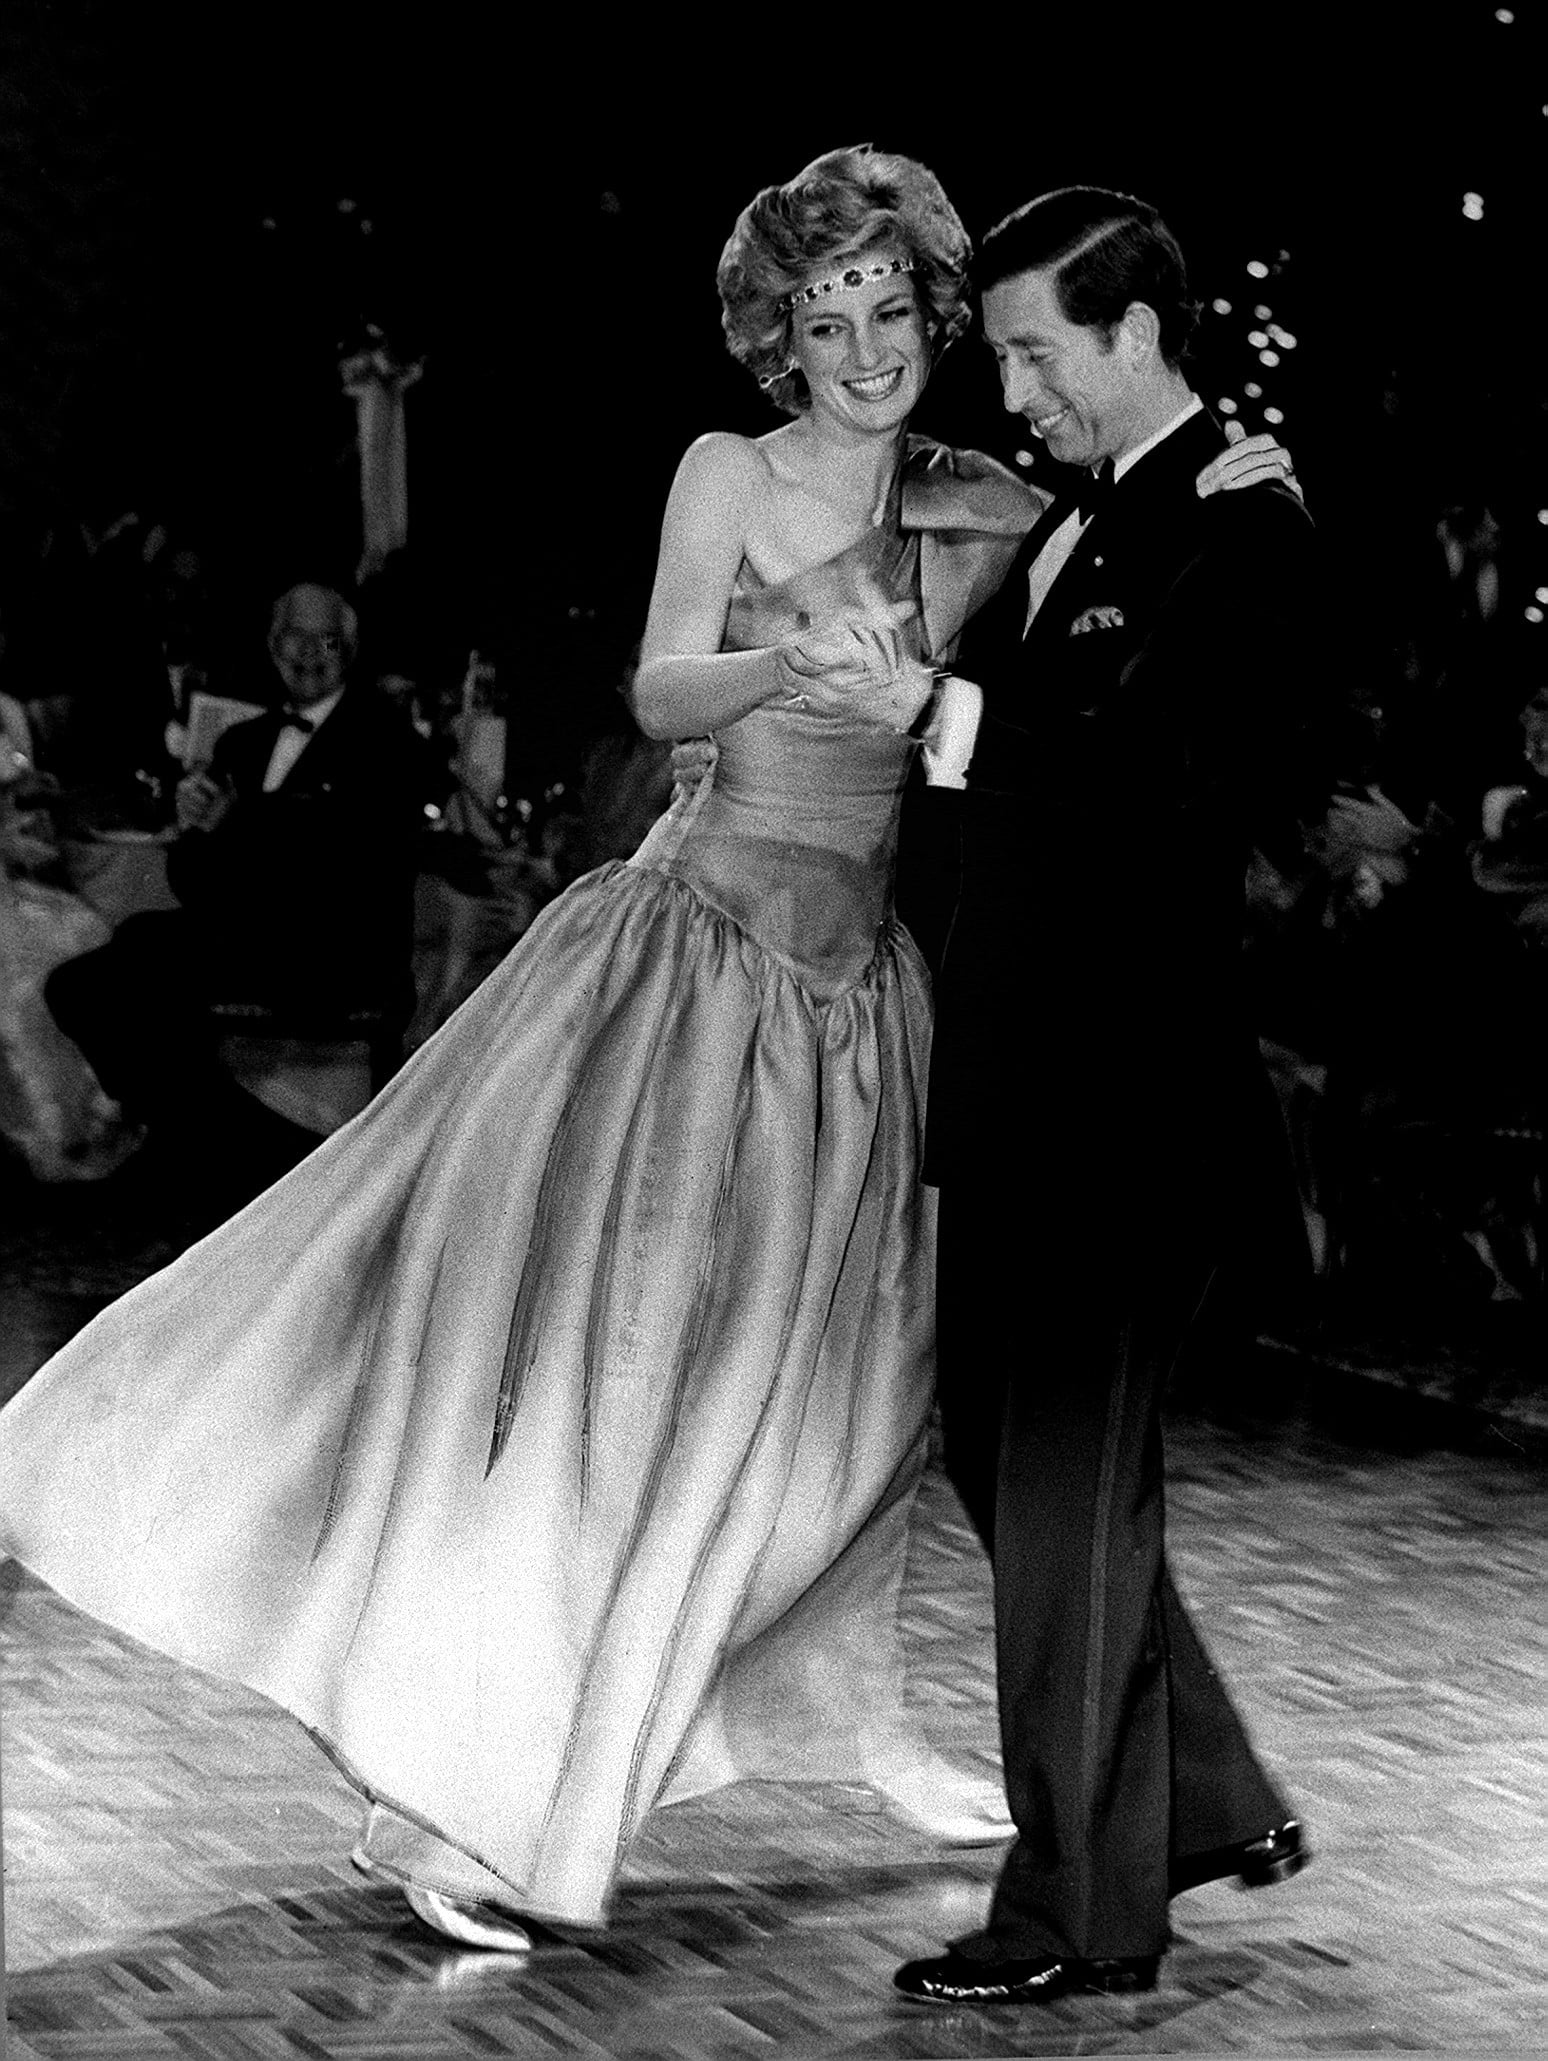 Princess Diana and Prince Charles dancing together in Melbourne Australia in 1985. Diana is wearing the famous £2 million emerald and diamond choker. 30th October 1985. (Photo by Gavin Kent /Mirrorpix/Getty Images)